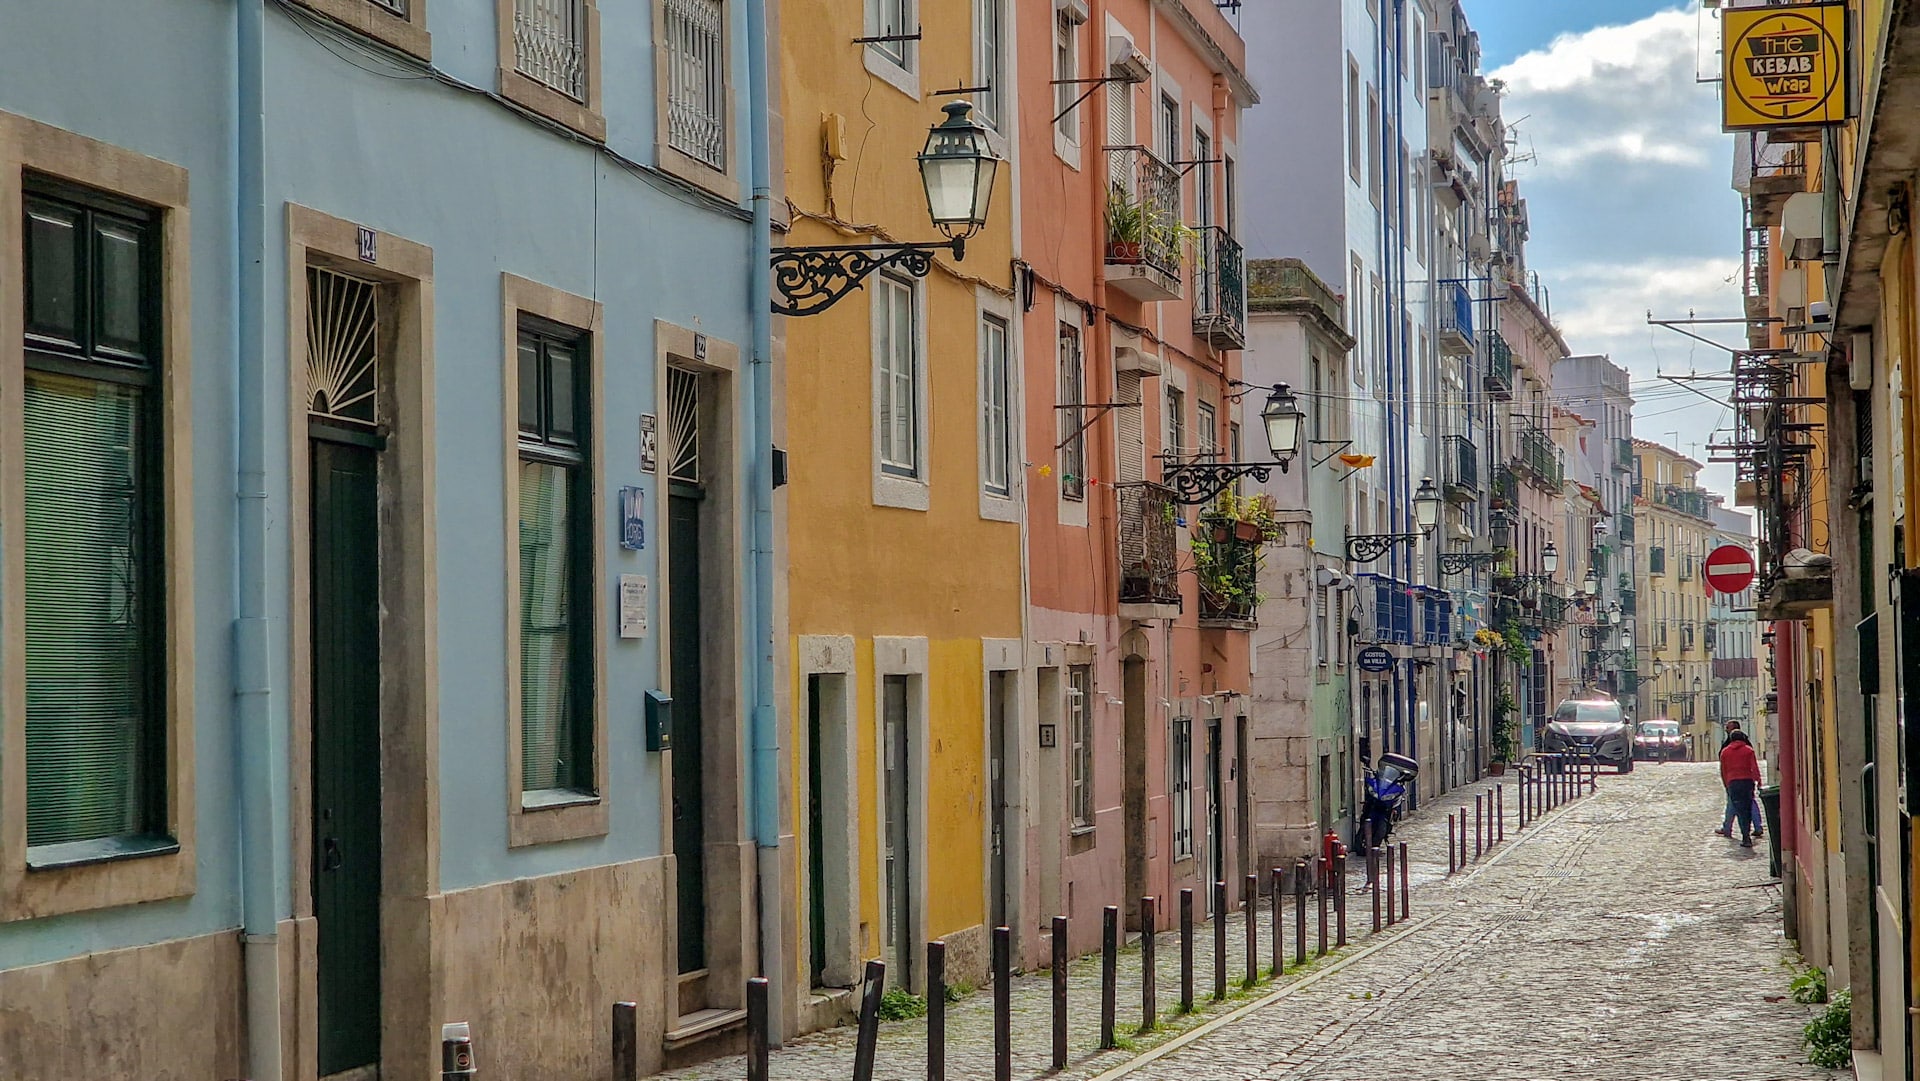 Located atop a hill, Bairro Alto is a lively and vibrant neighborhood known for its many bars, restaurants, and nightlife